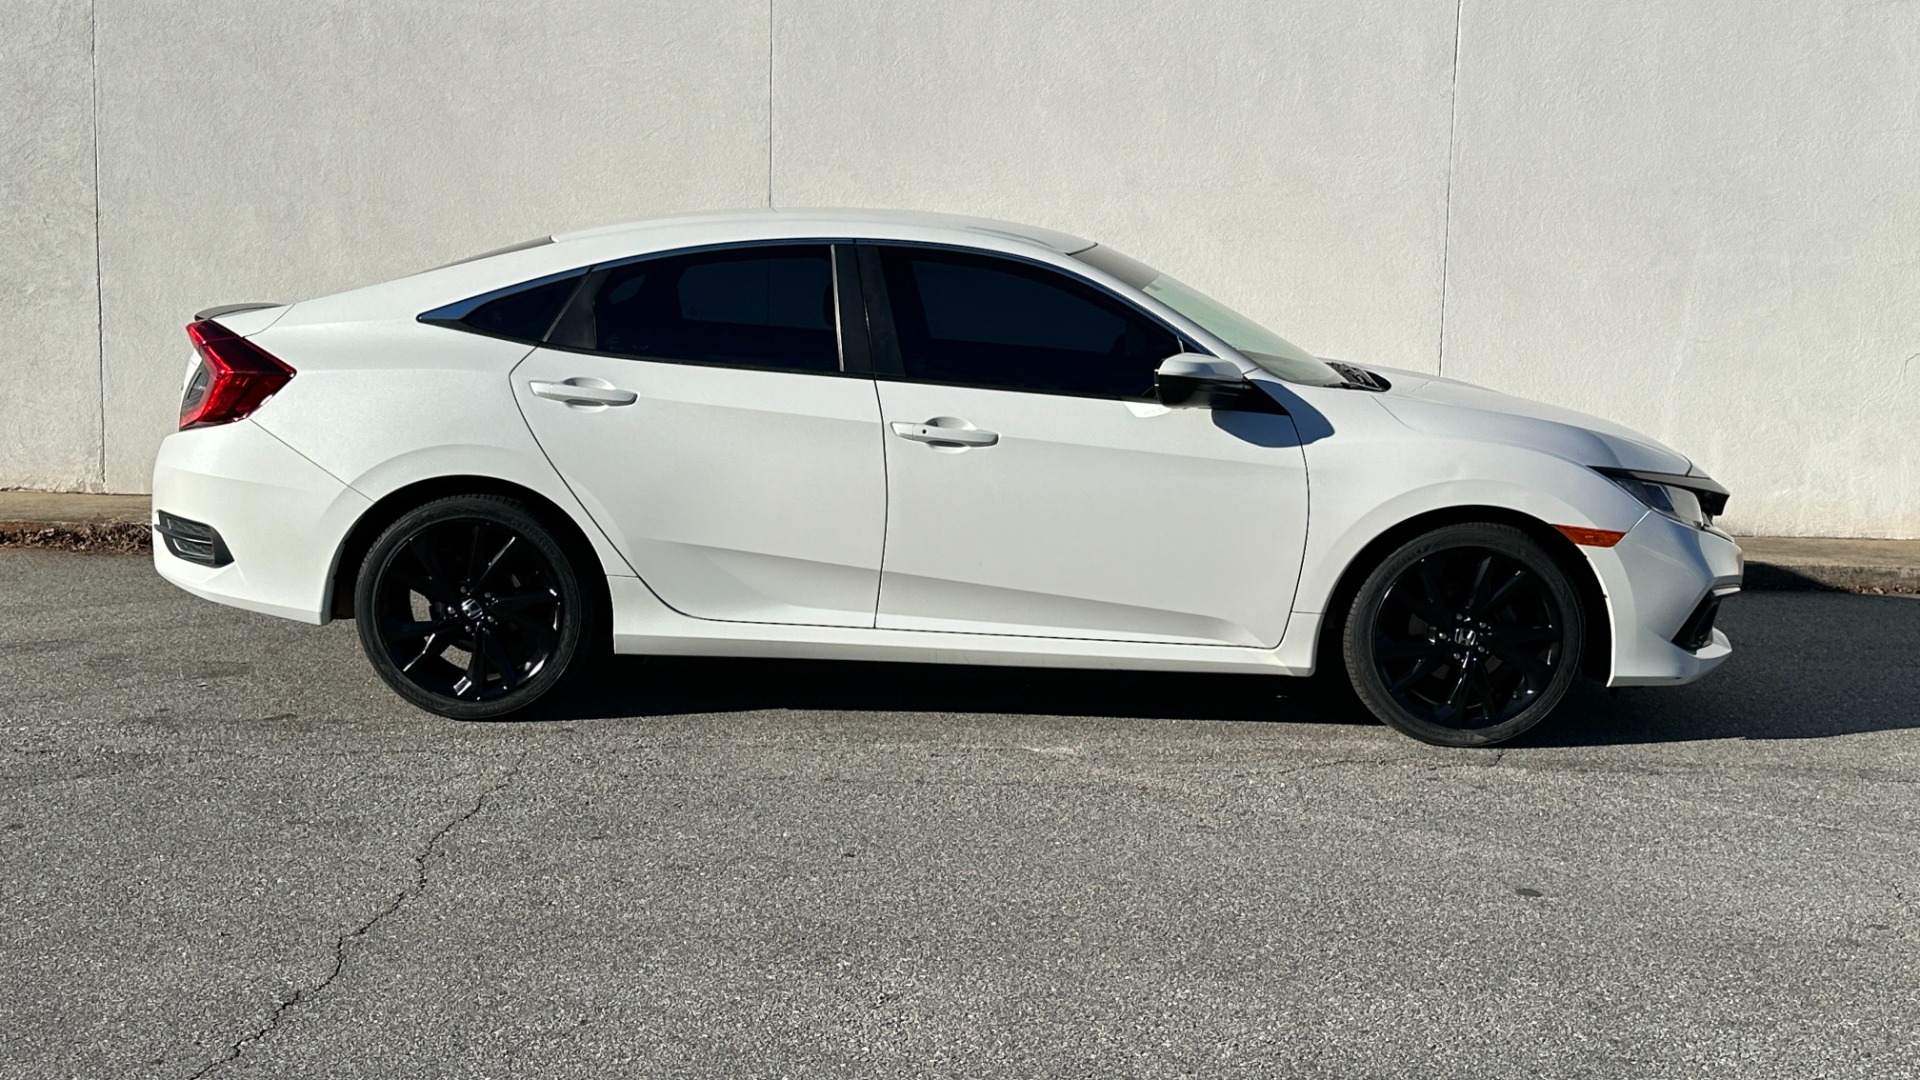 Used 2019 Honda Civic Sedan SPORT / CLOTH / REARVIEW / 4CYL for sale $21,995 at Formula Imports in Charlotte NC 28227 6